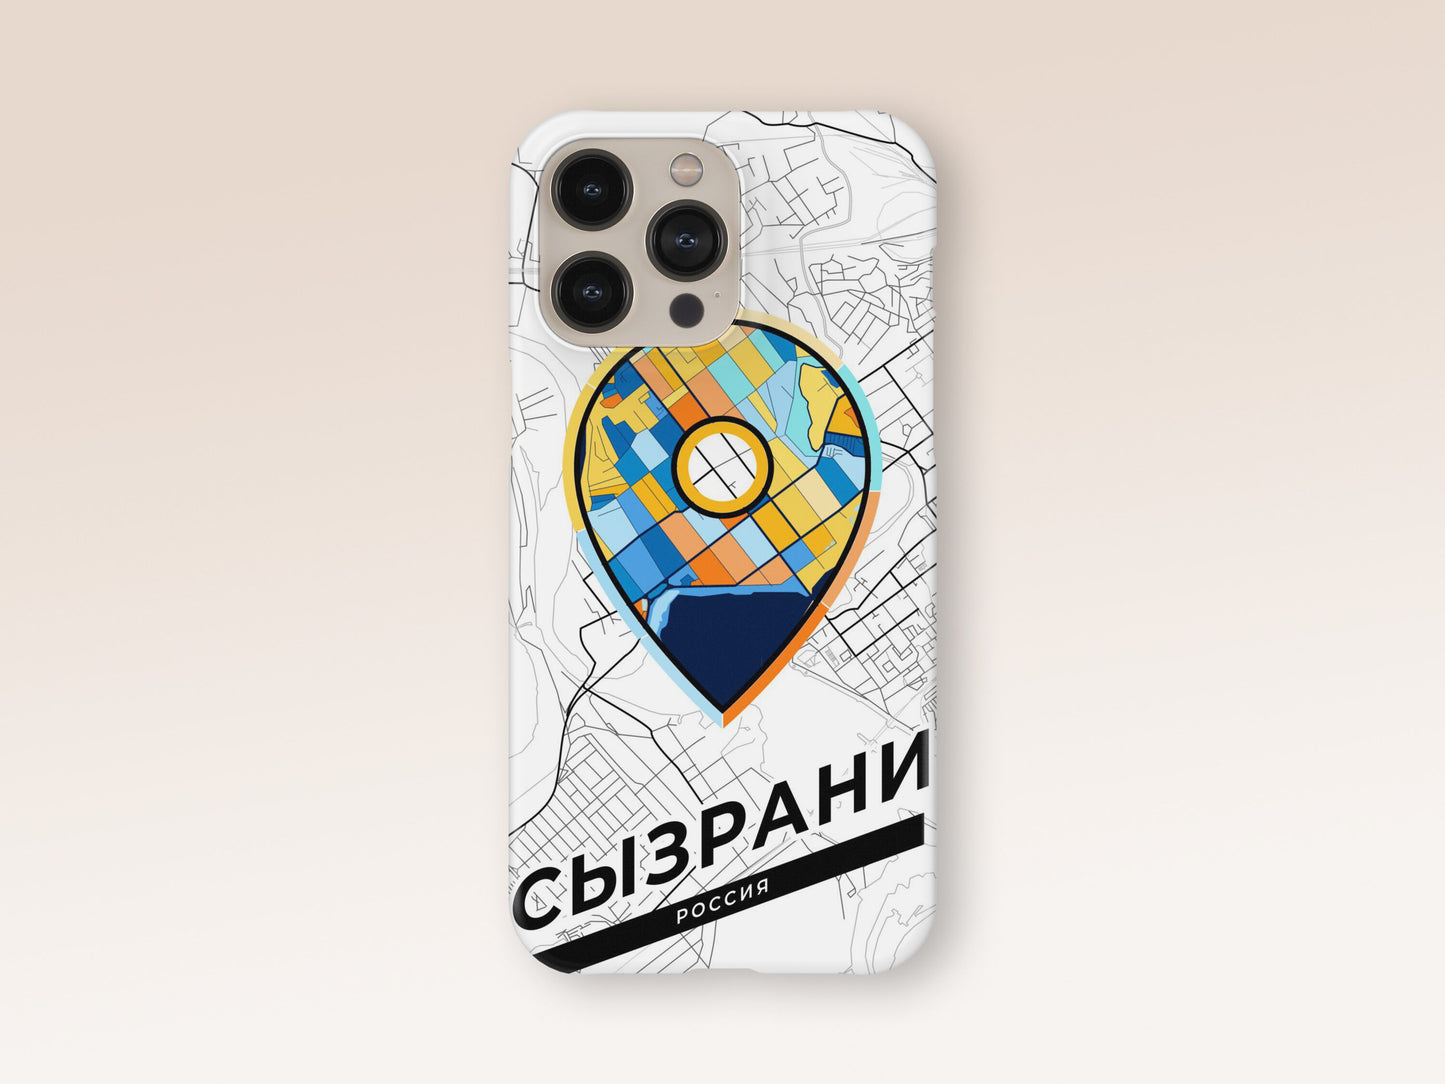 Syzran Russia slim phone case with colorful icon 1